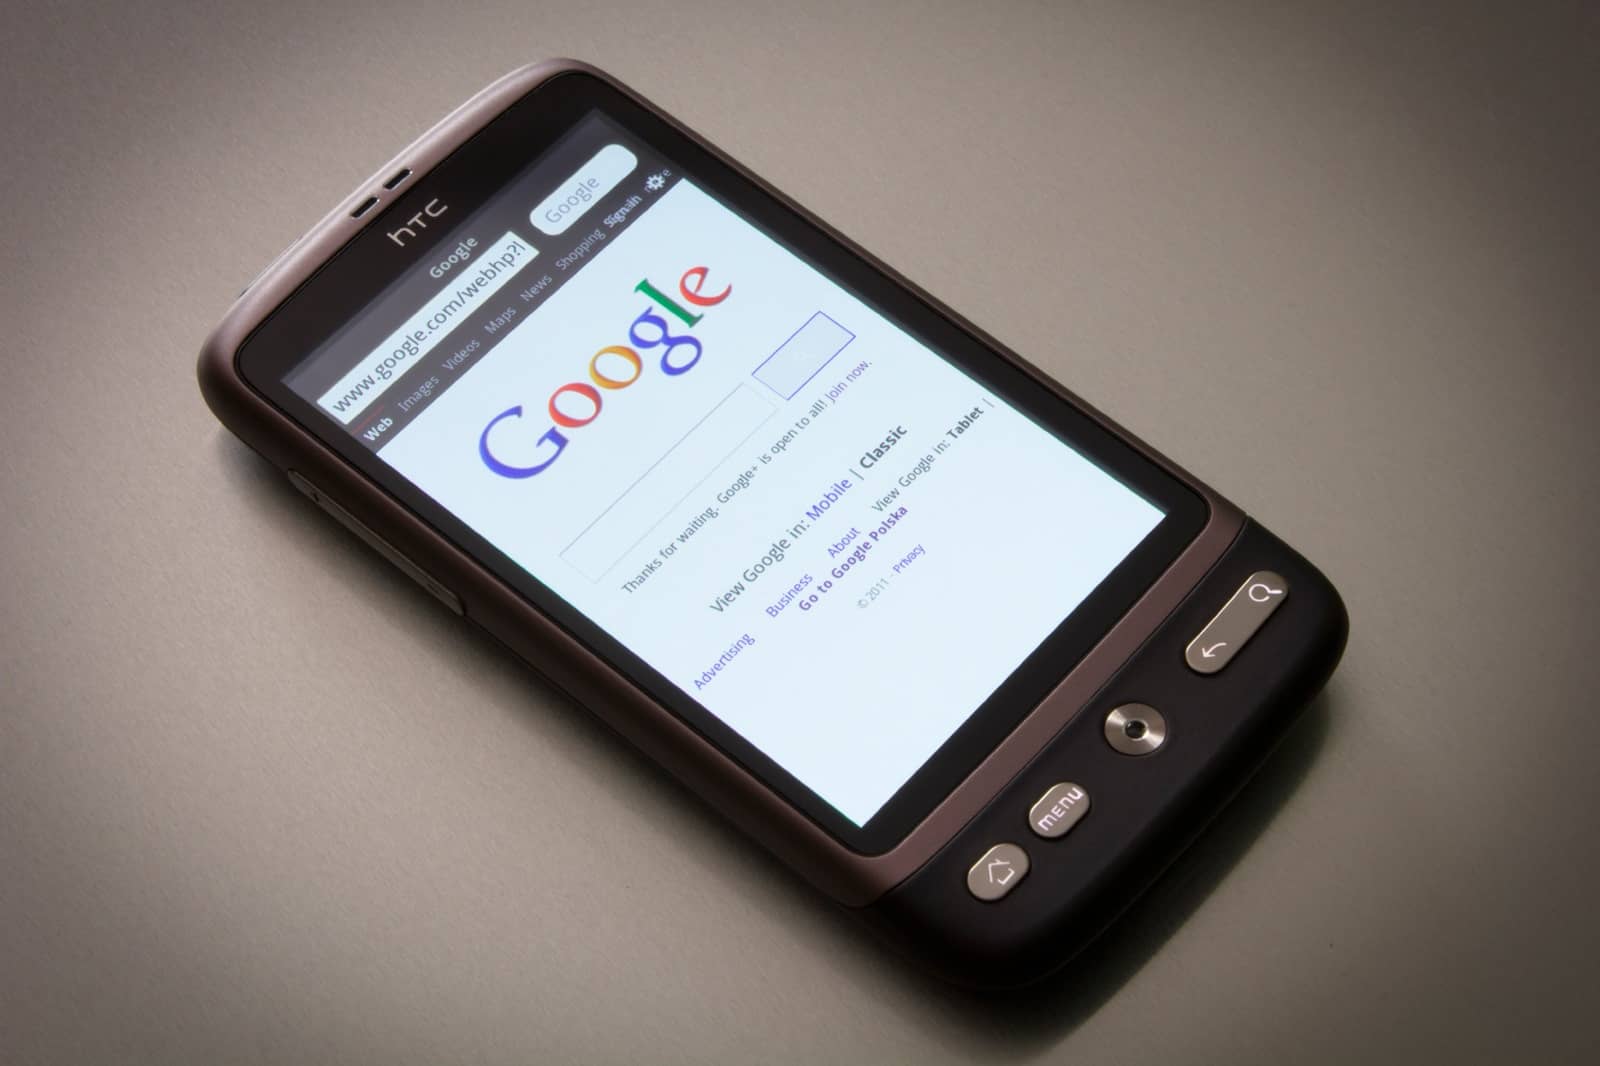 Google displayed on a mobile phone